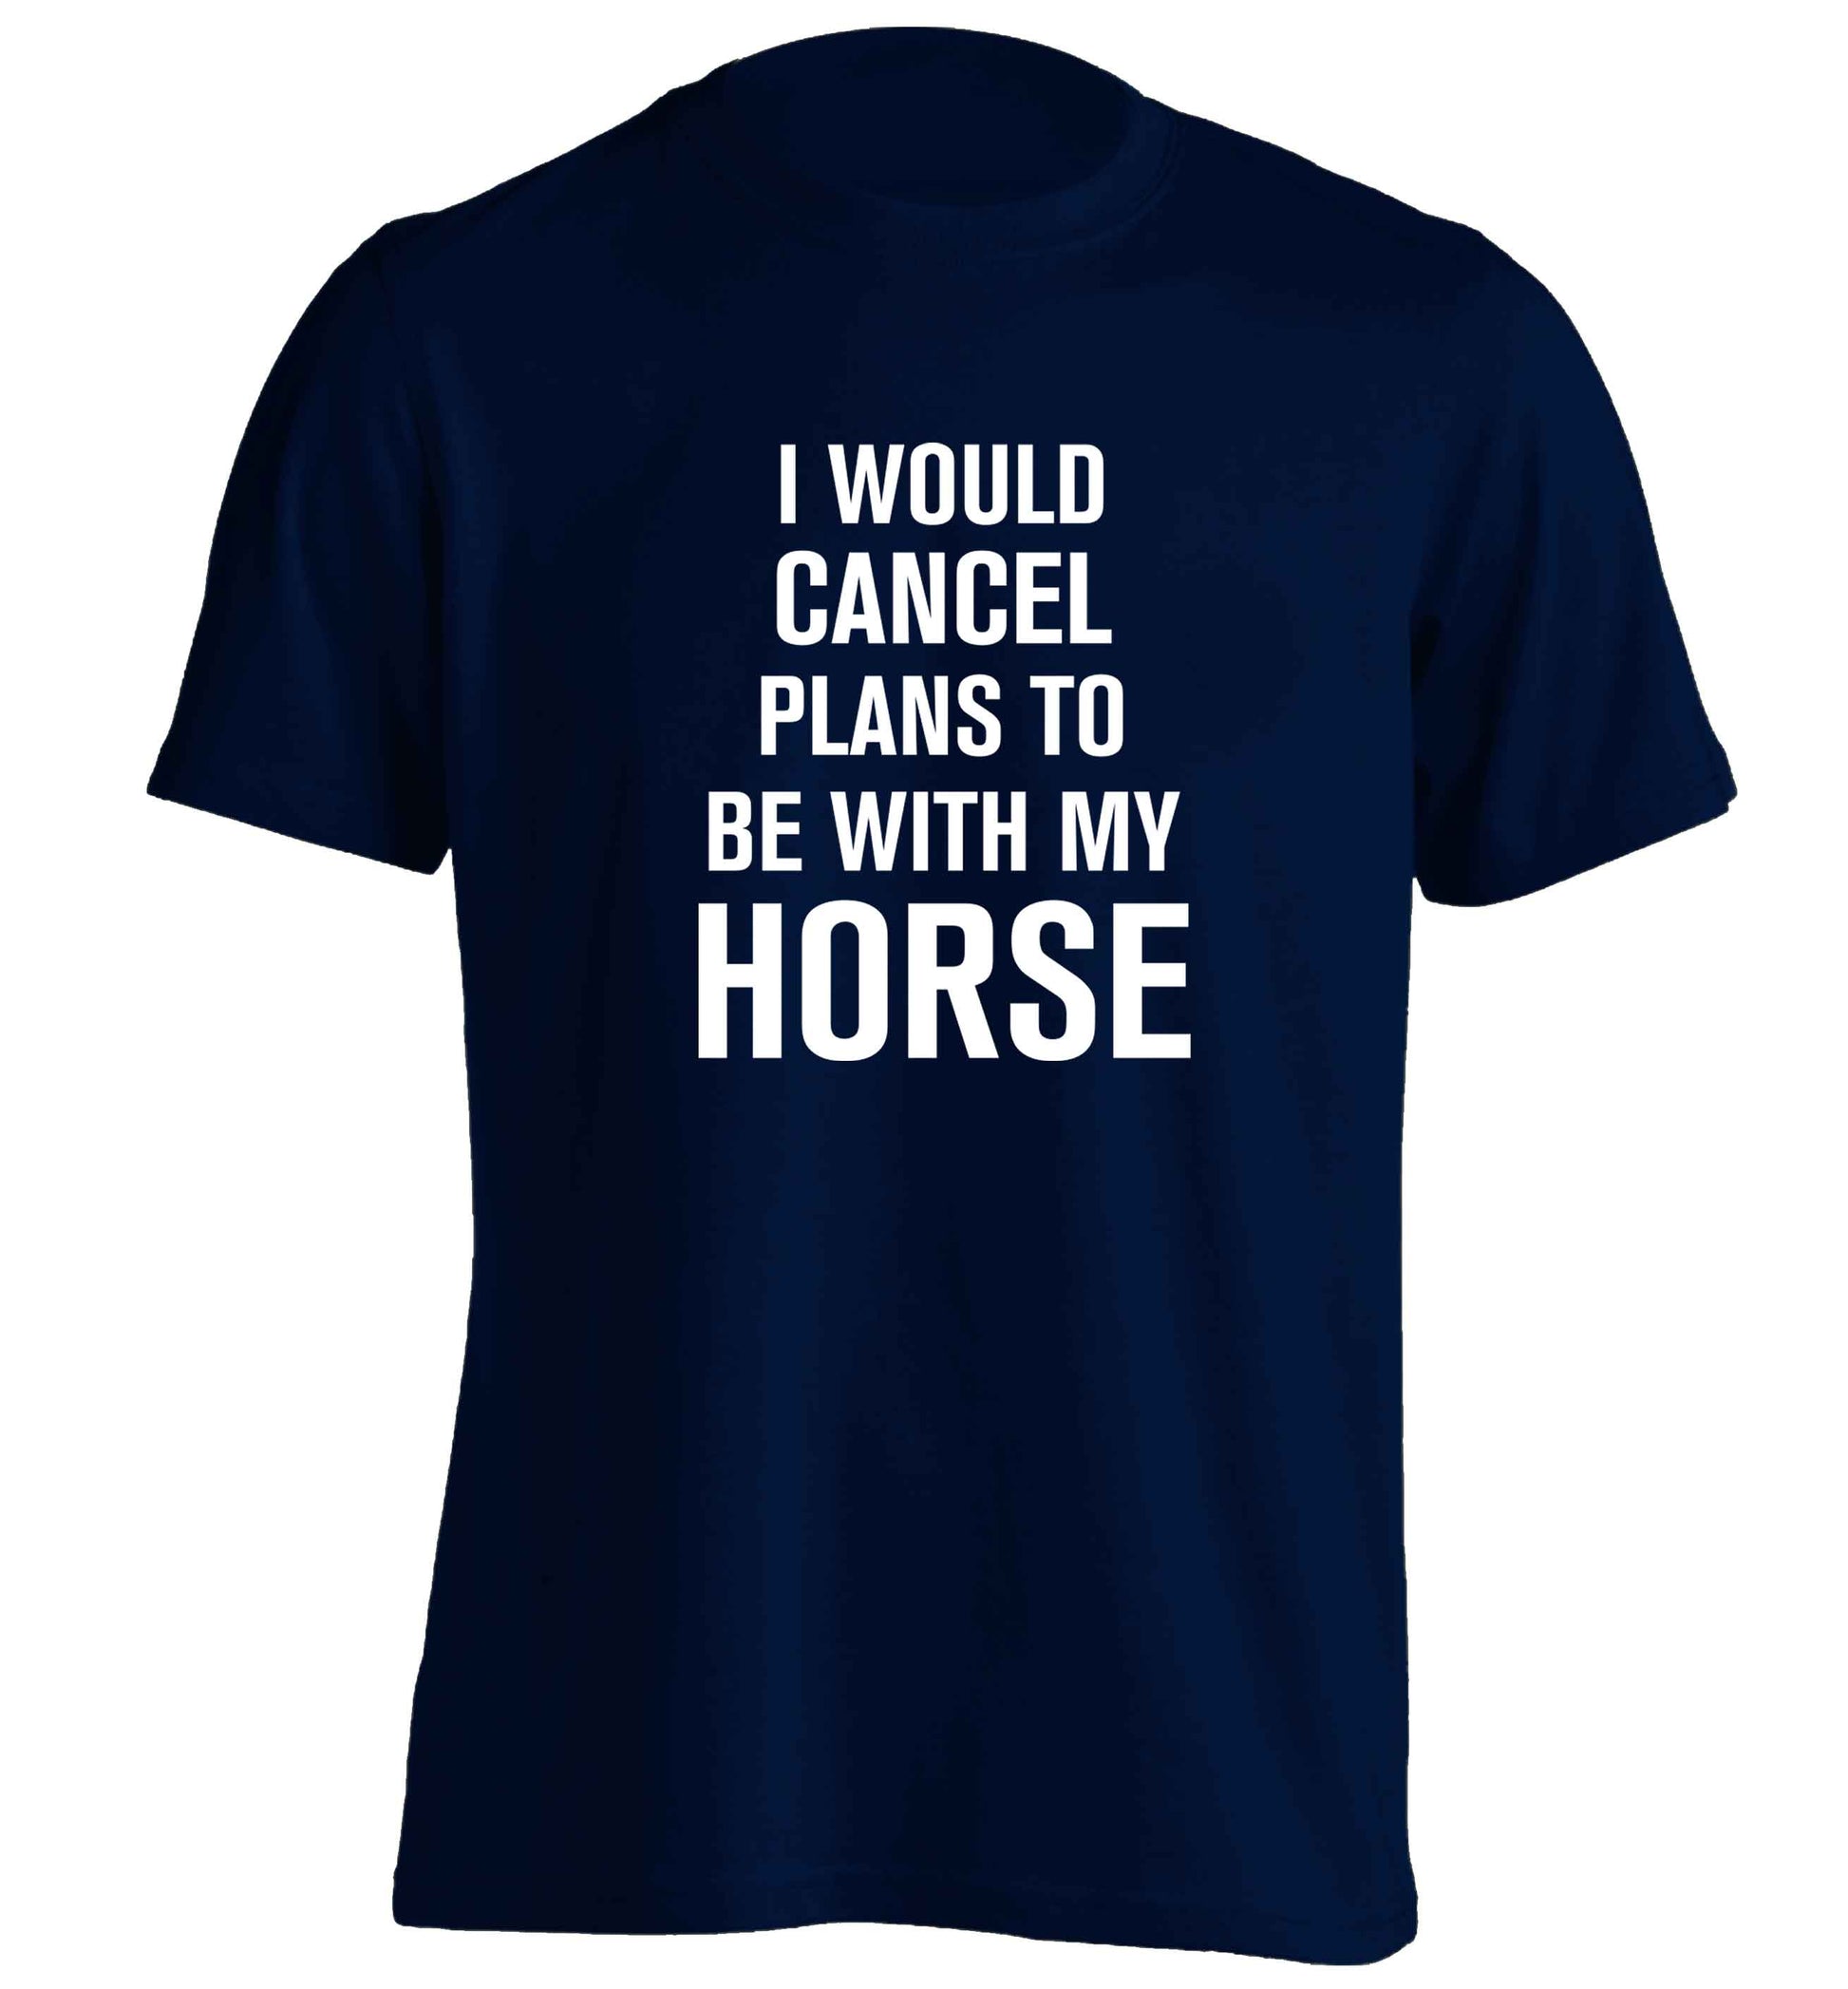 I will cancel plans to be with my horse adults unisex navy Tshirt 2XL